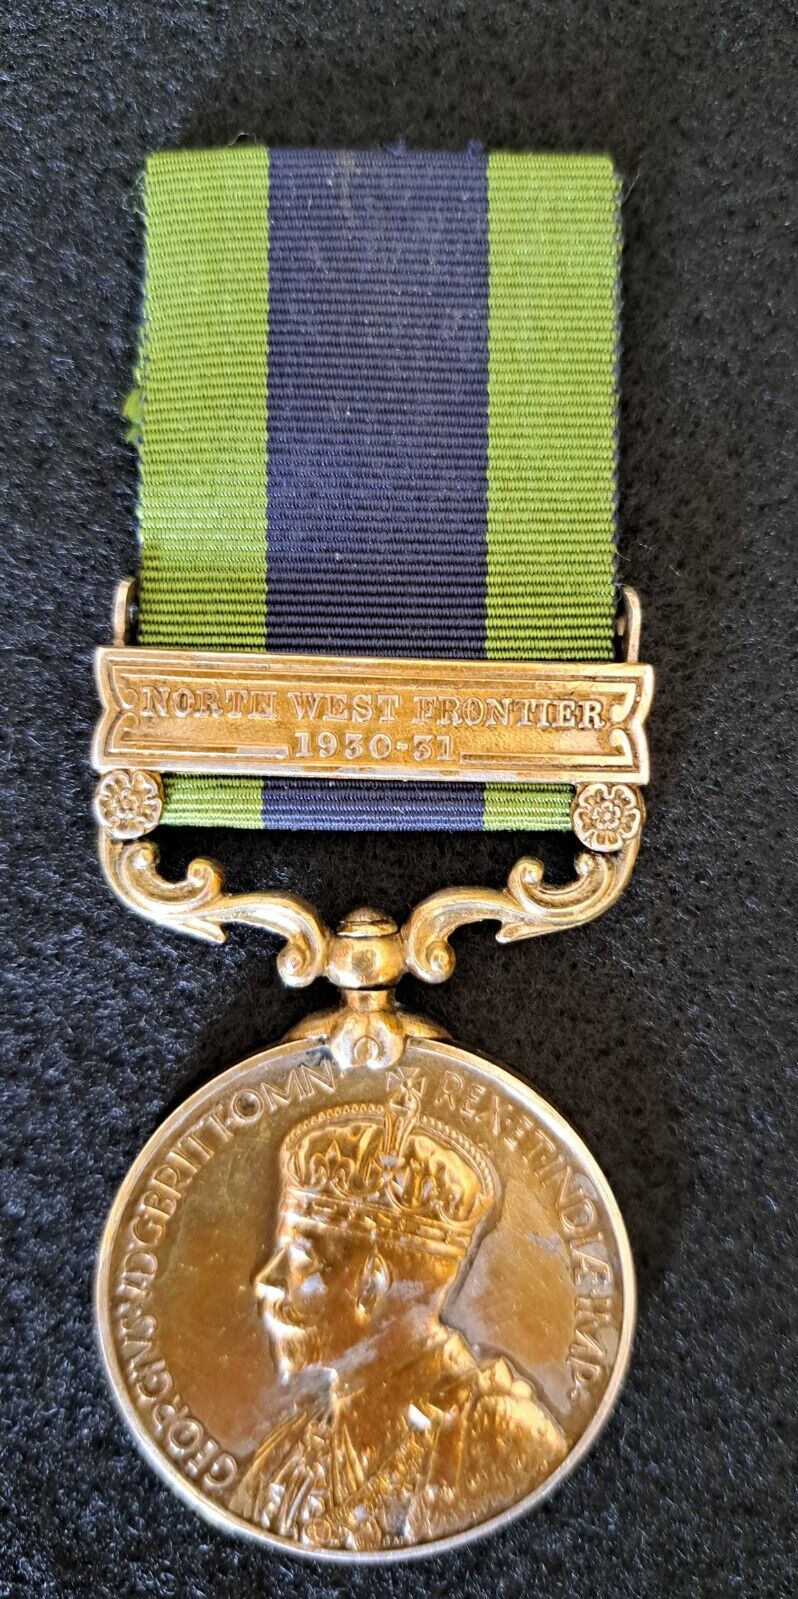 British Indian General Service Medal 1908 with clasp NW Frontier 1930-31